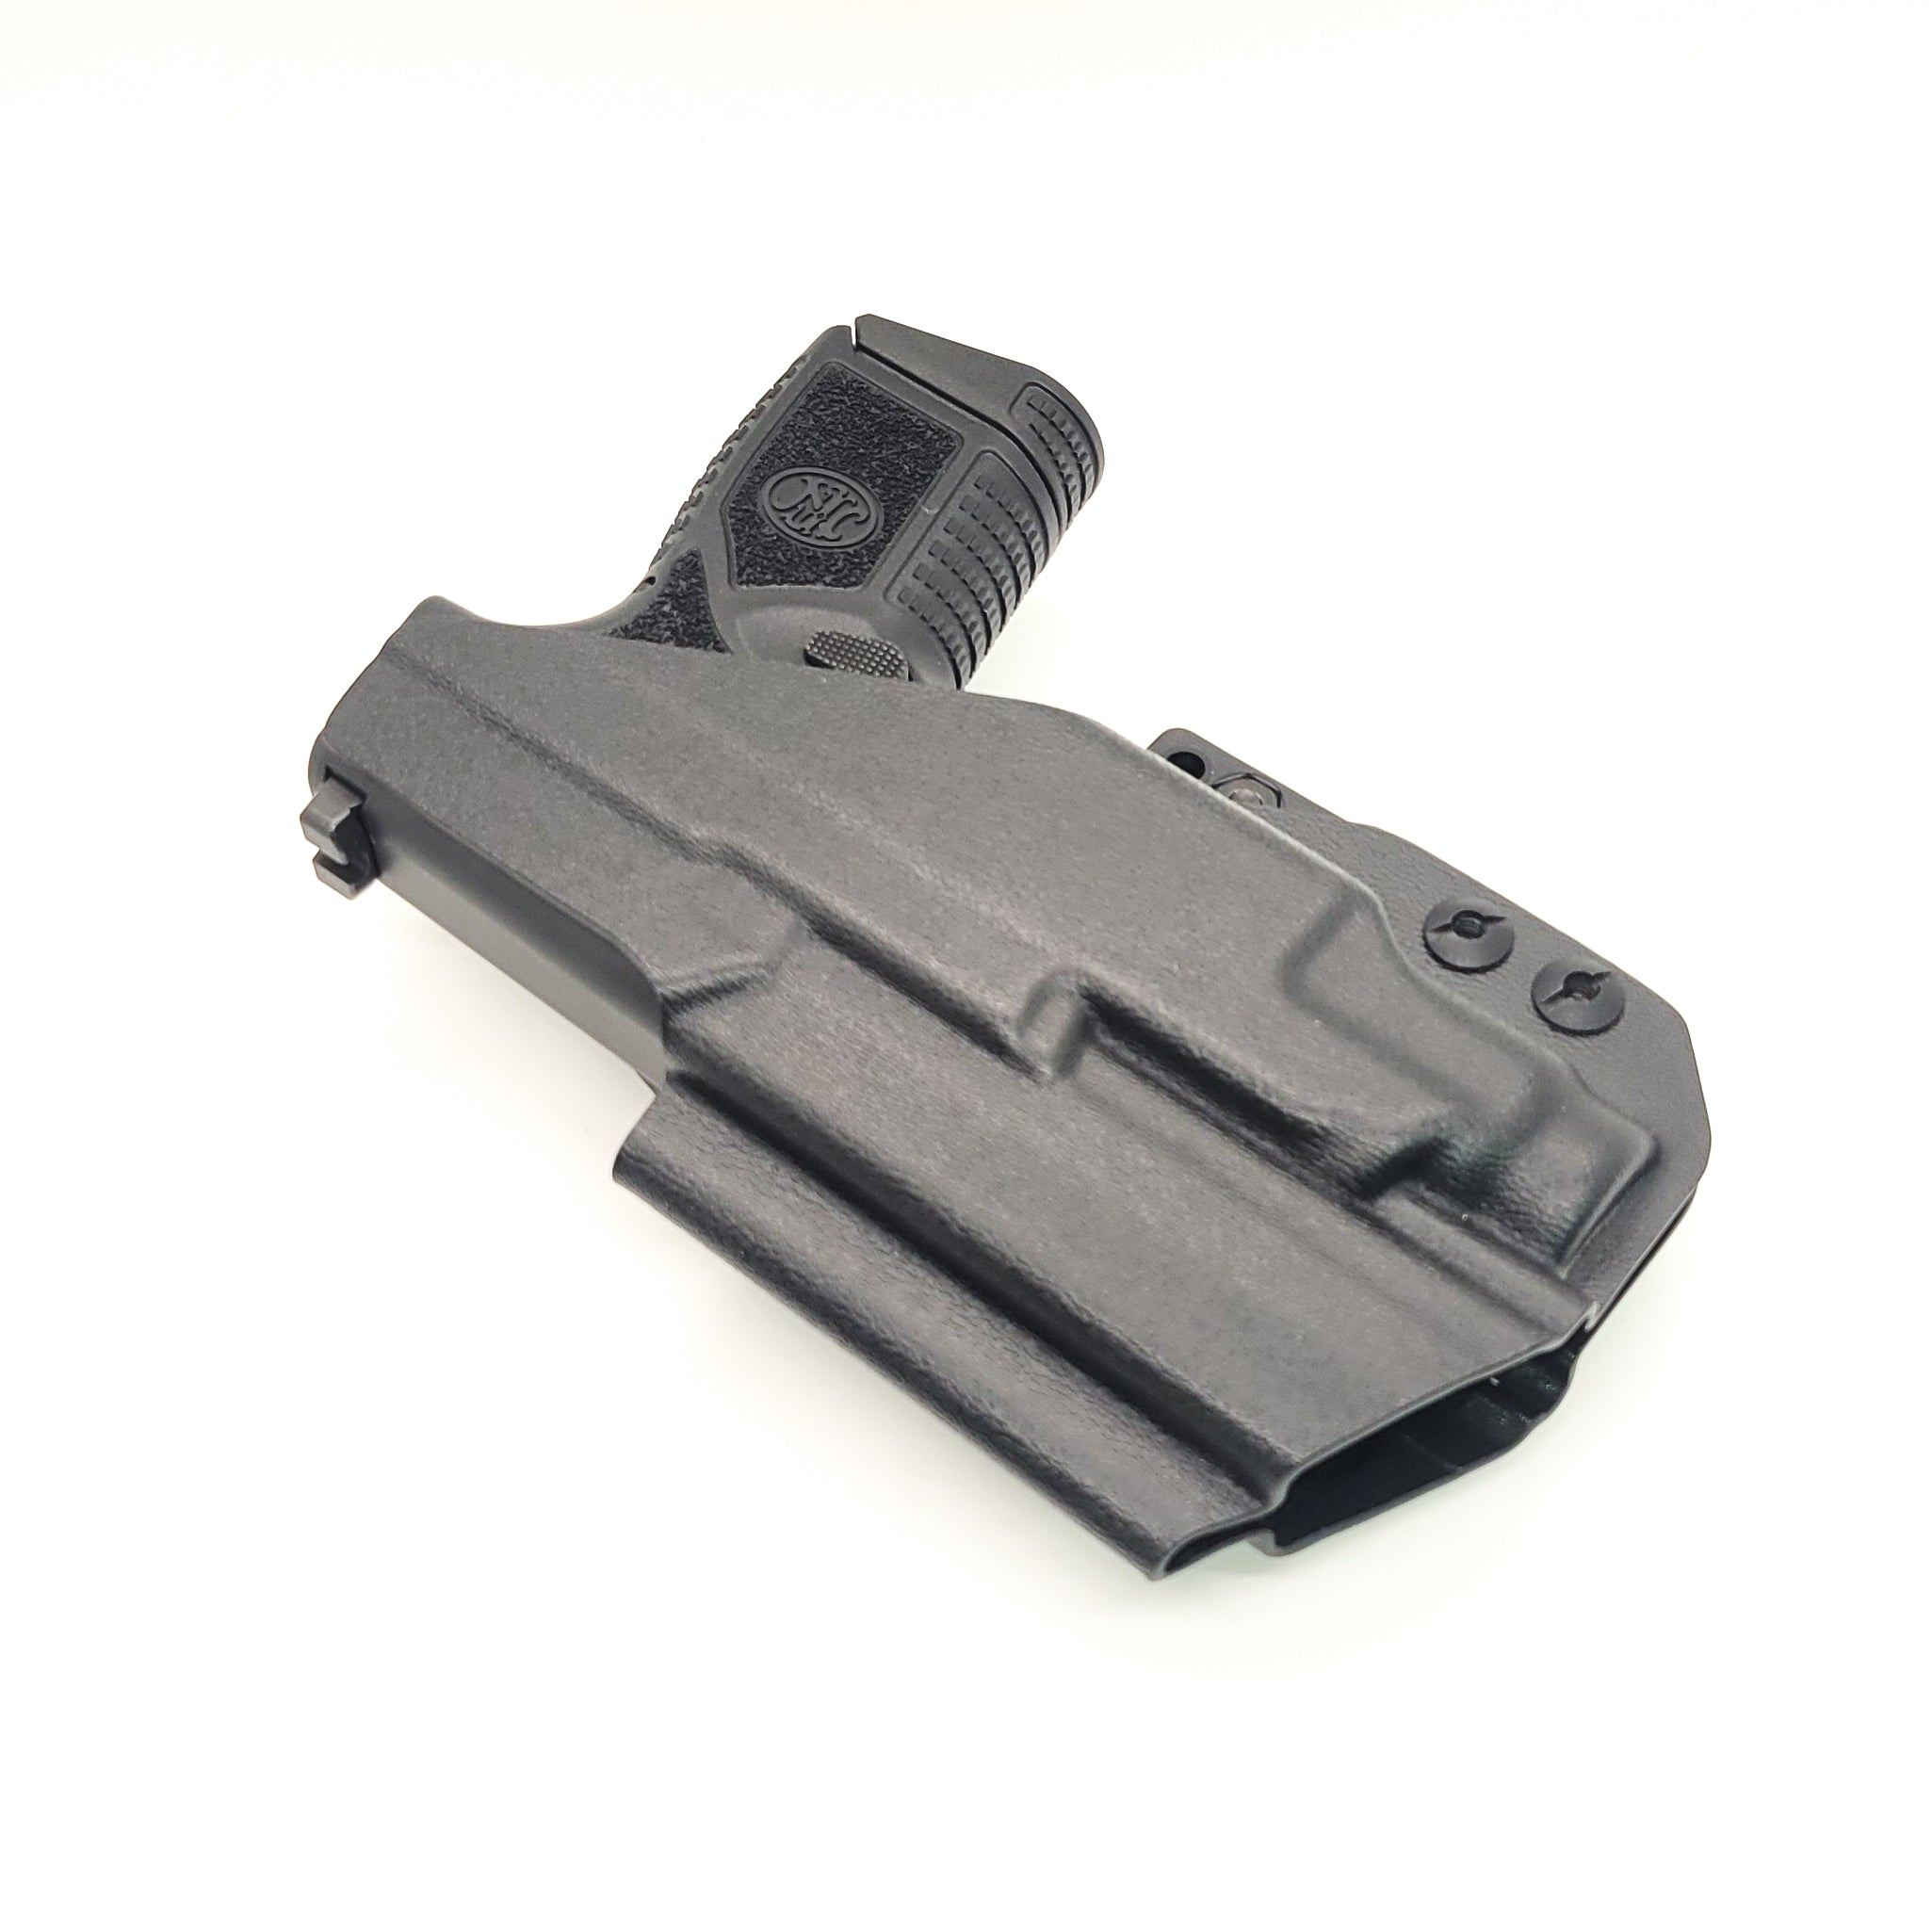 For the best, most comfortable concealed IWB AIWB inside waistband kydex holster designed for the FN Reflex pistol with the Streamlight GL TLR-7 Sub (69400), shop Four Brothers Holsters.  Adjustable retention, open muzzle, profile cut for red dot optics or sights.  Suitable for pocket carry.  Made in the USA. FN REFLEX